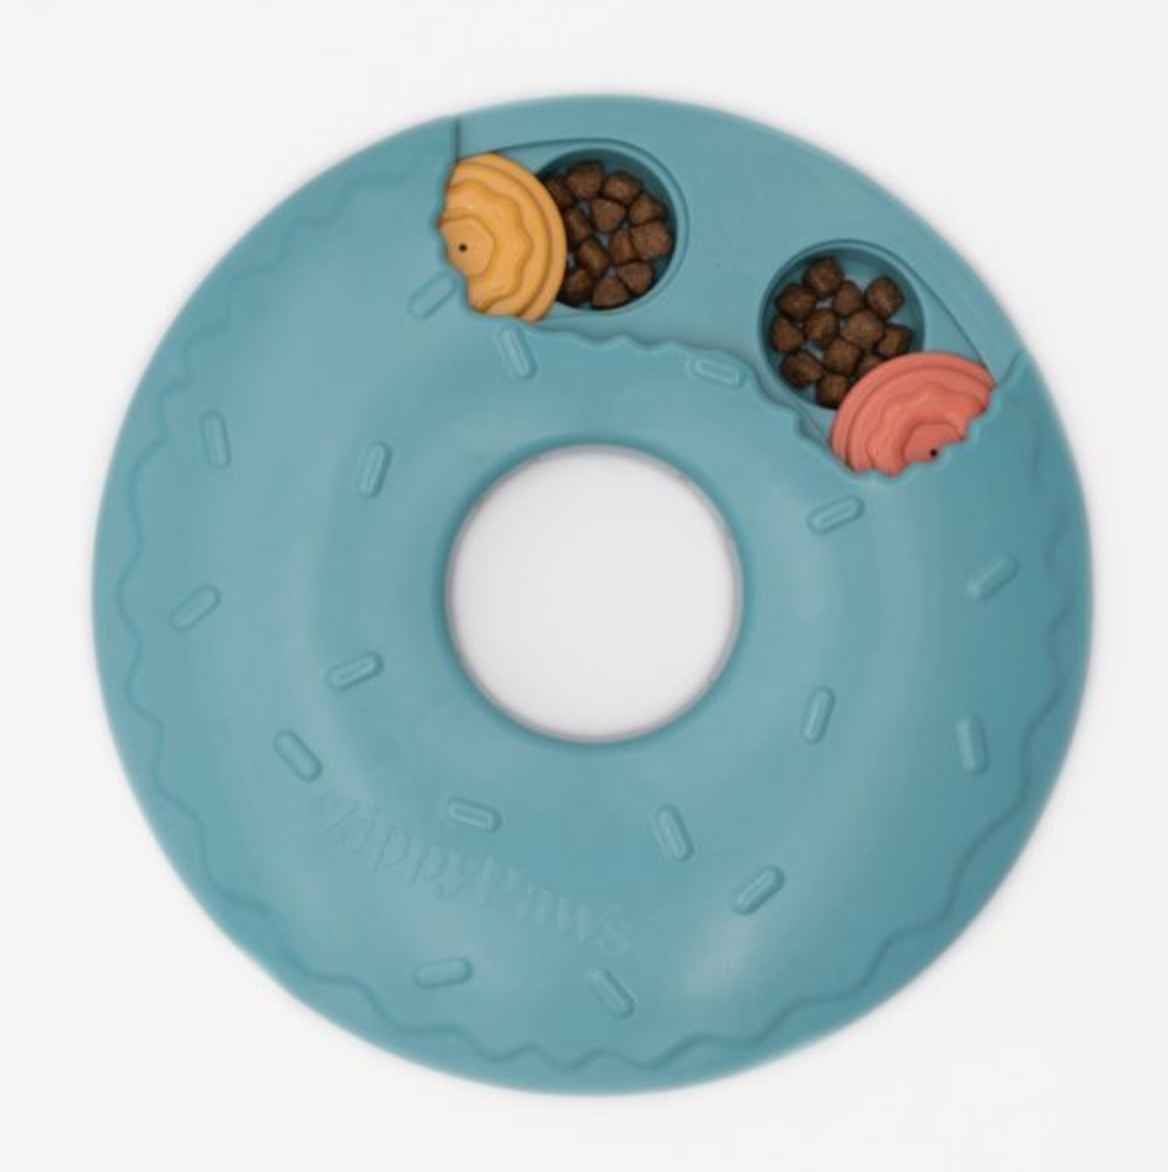 Zippy Paws - SmartyPaws Puzzler Donut Slider